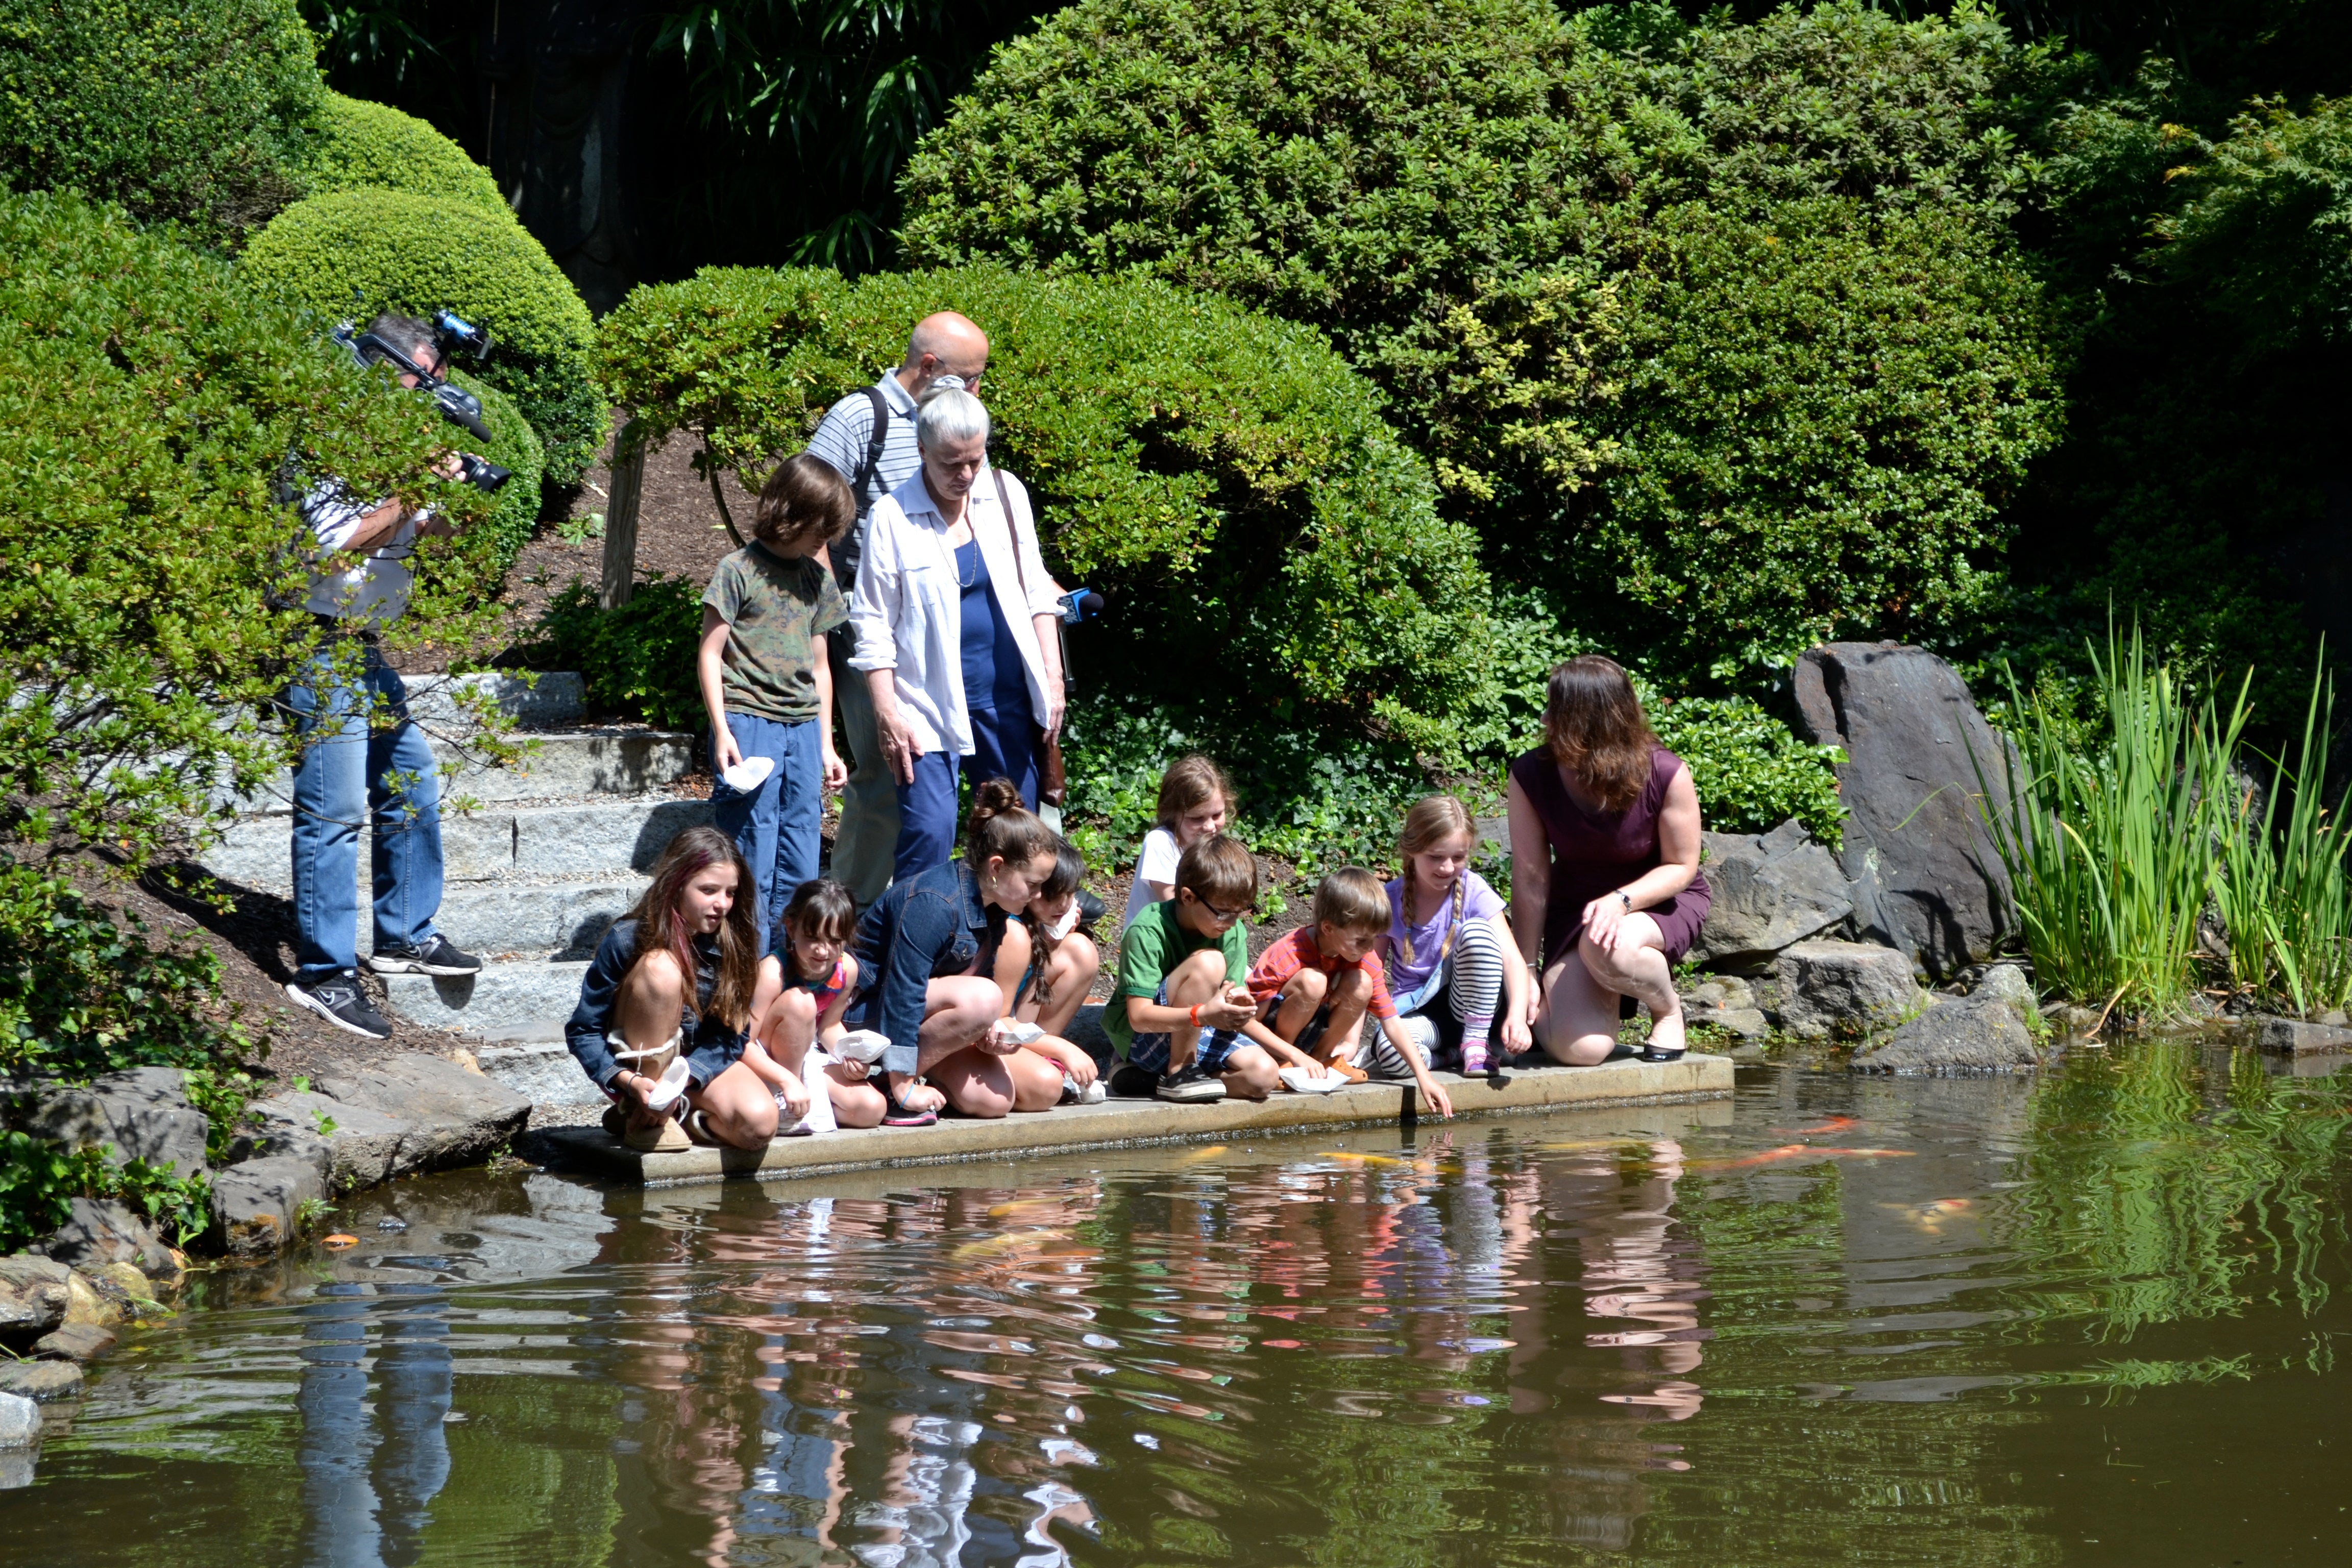 Campers fed koi fish from the restored boat launch and new granite steps